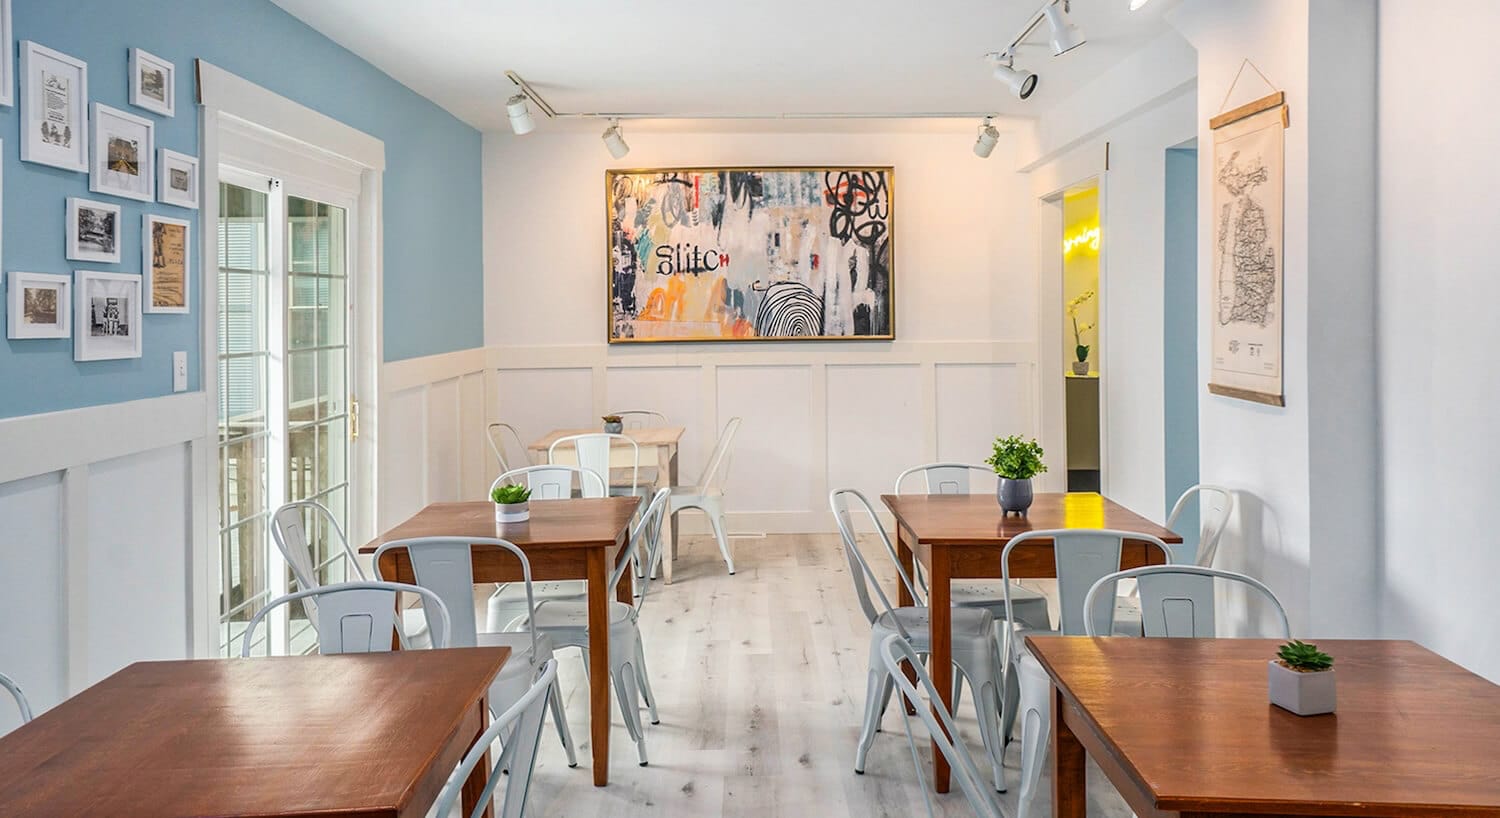 A dining room with pale blue walls, white wainscotting, wood floors, and several wood tables and metal chairs throughout the room.